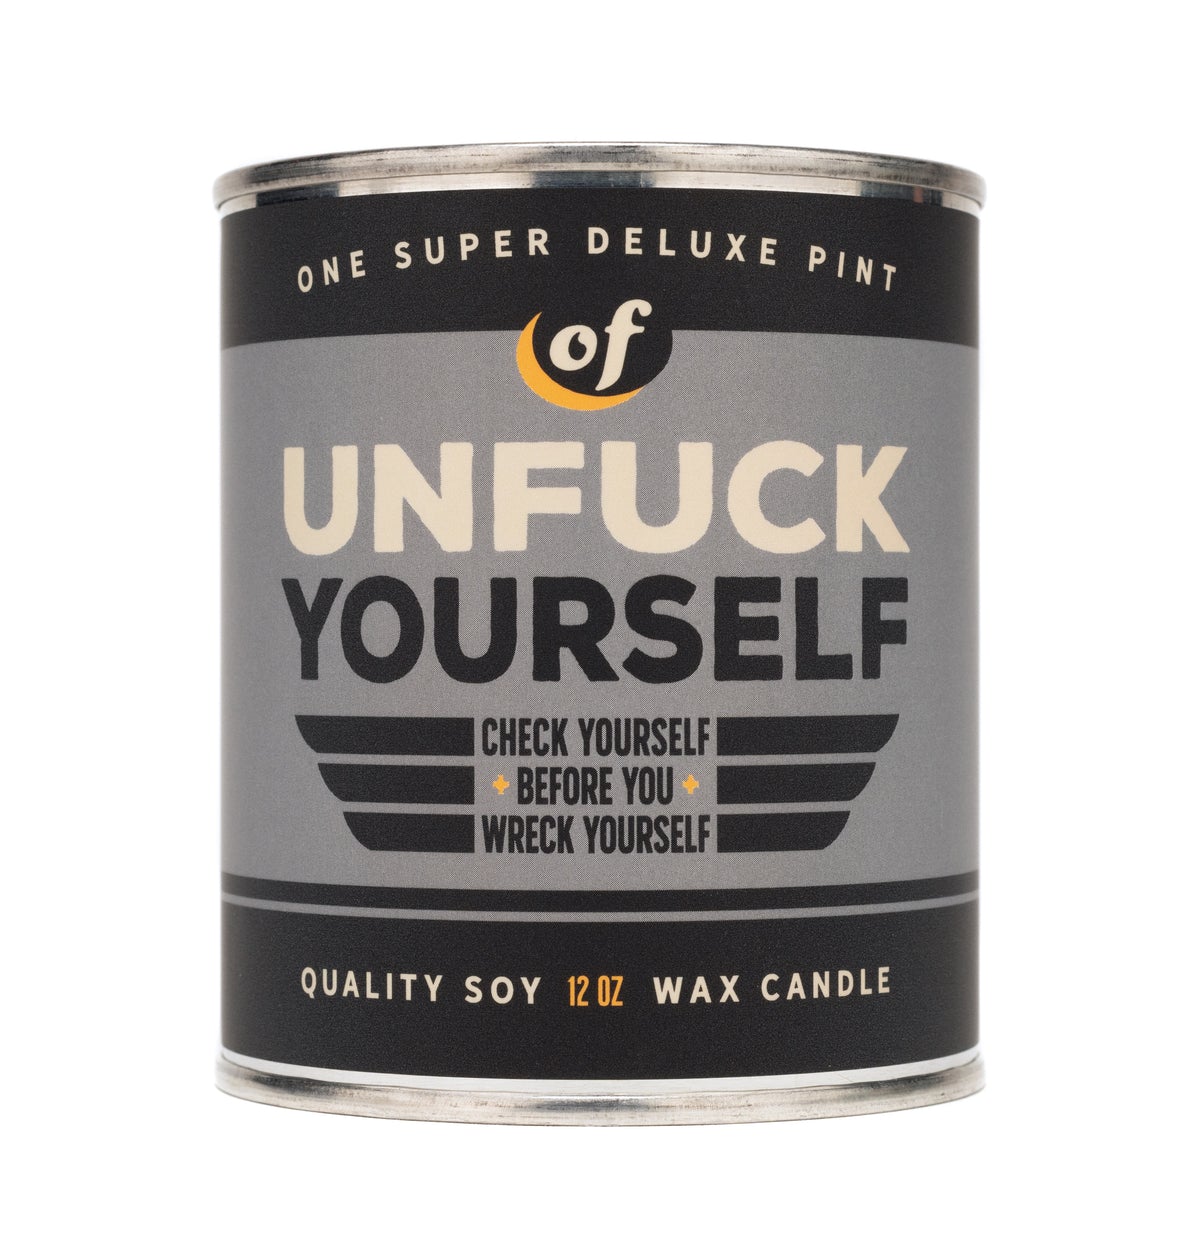 Unfuck Yourself-Vintage Paint Can-dle